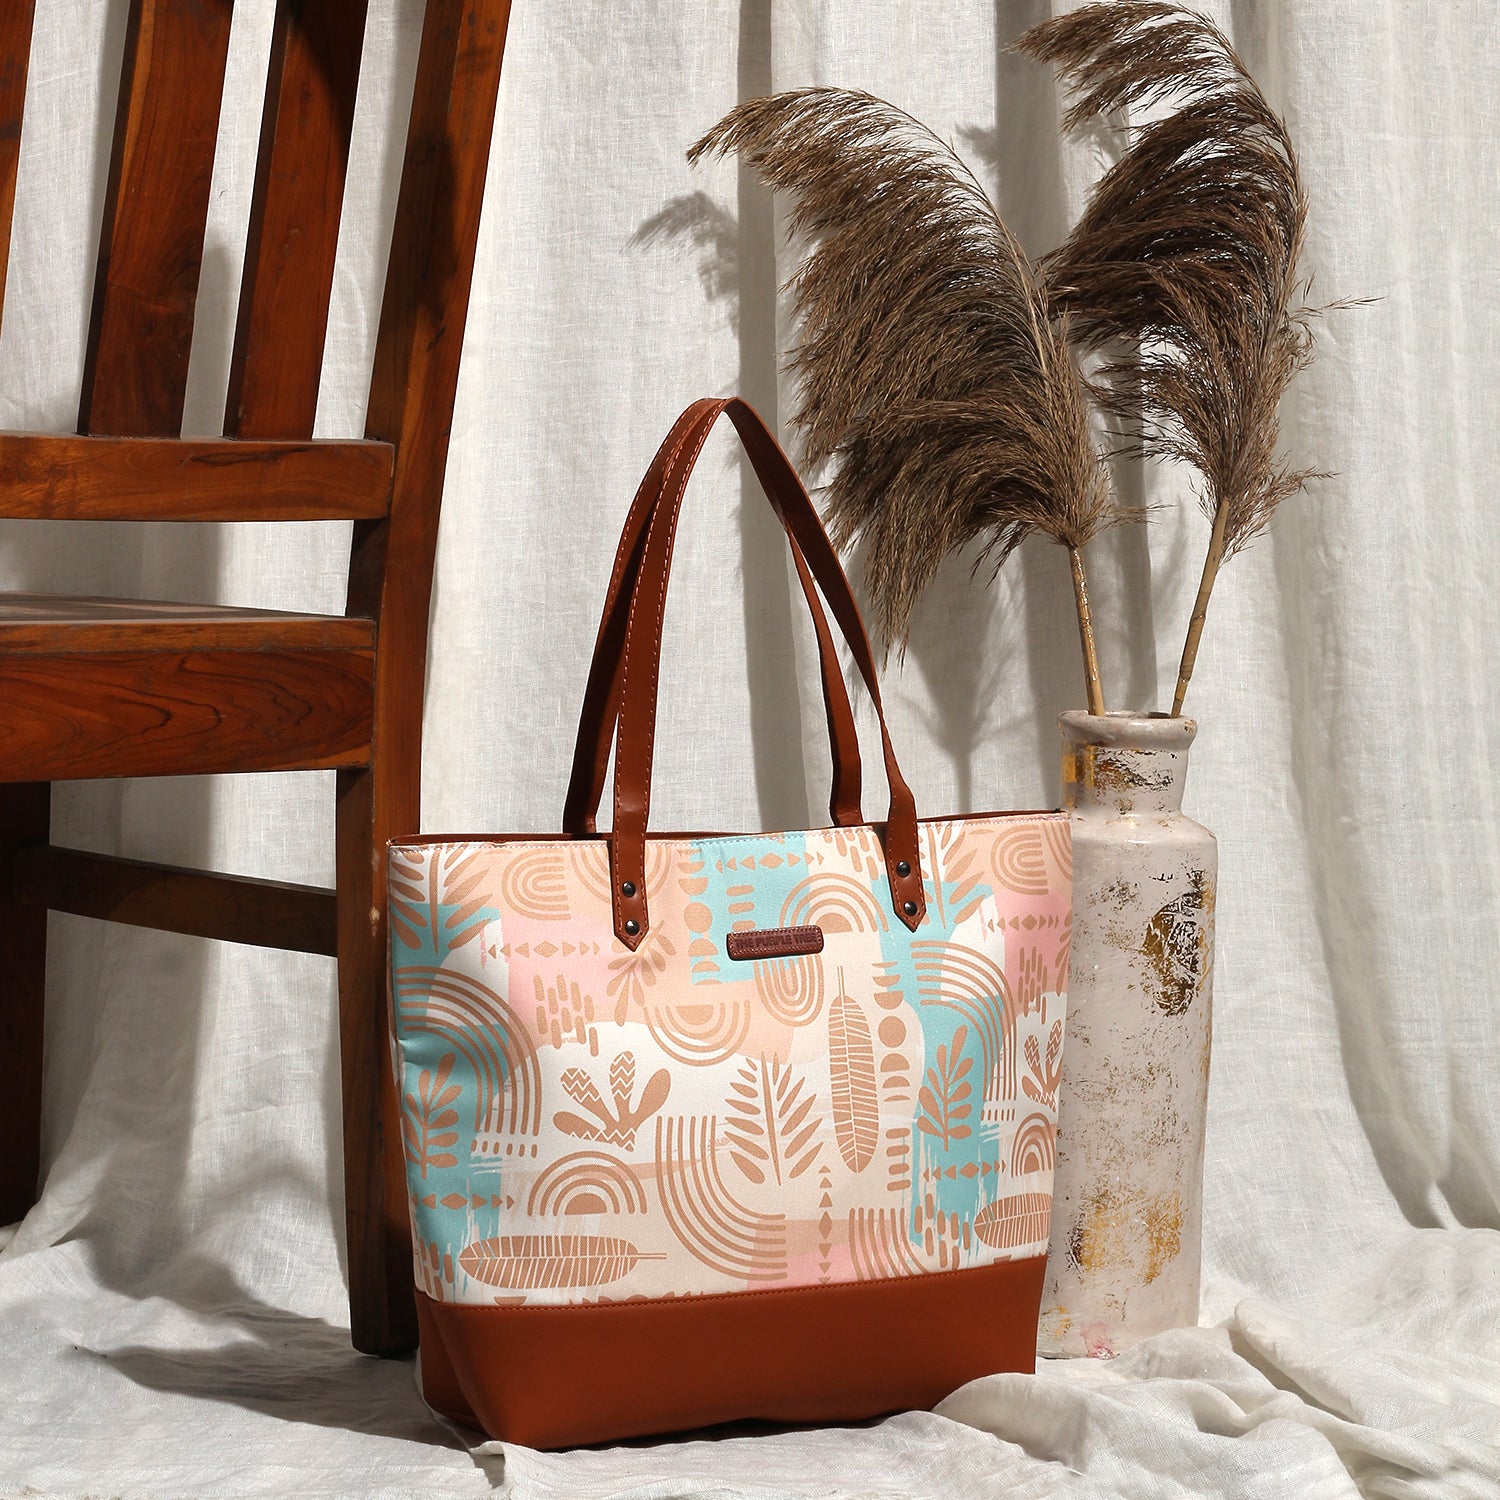 Light blue and pink patterned tote bag, perfect for carrying essentials in style.